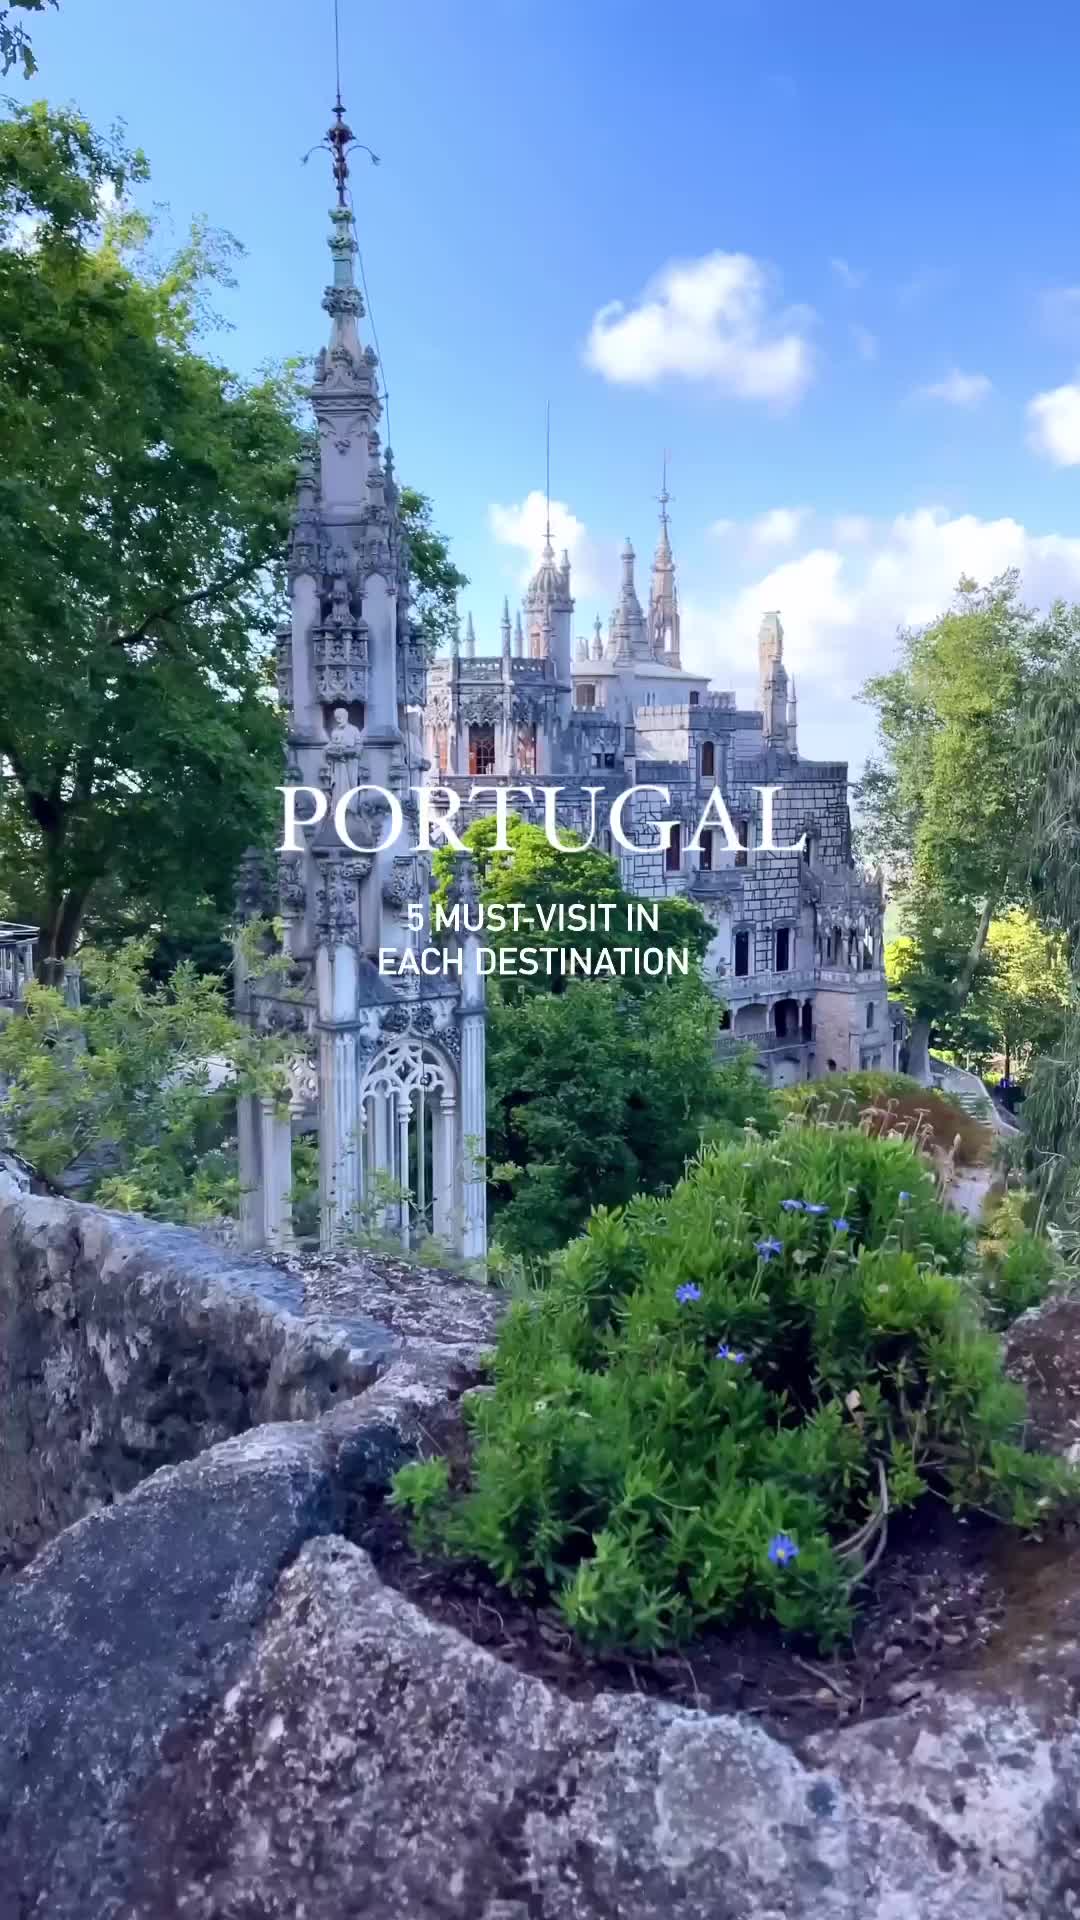 Must Visit Places in Portugal: Top 4 Destinations